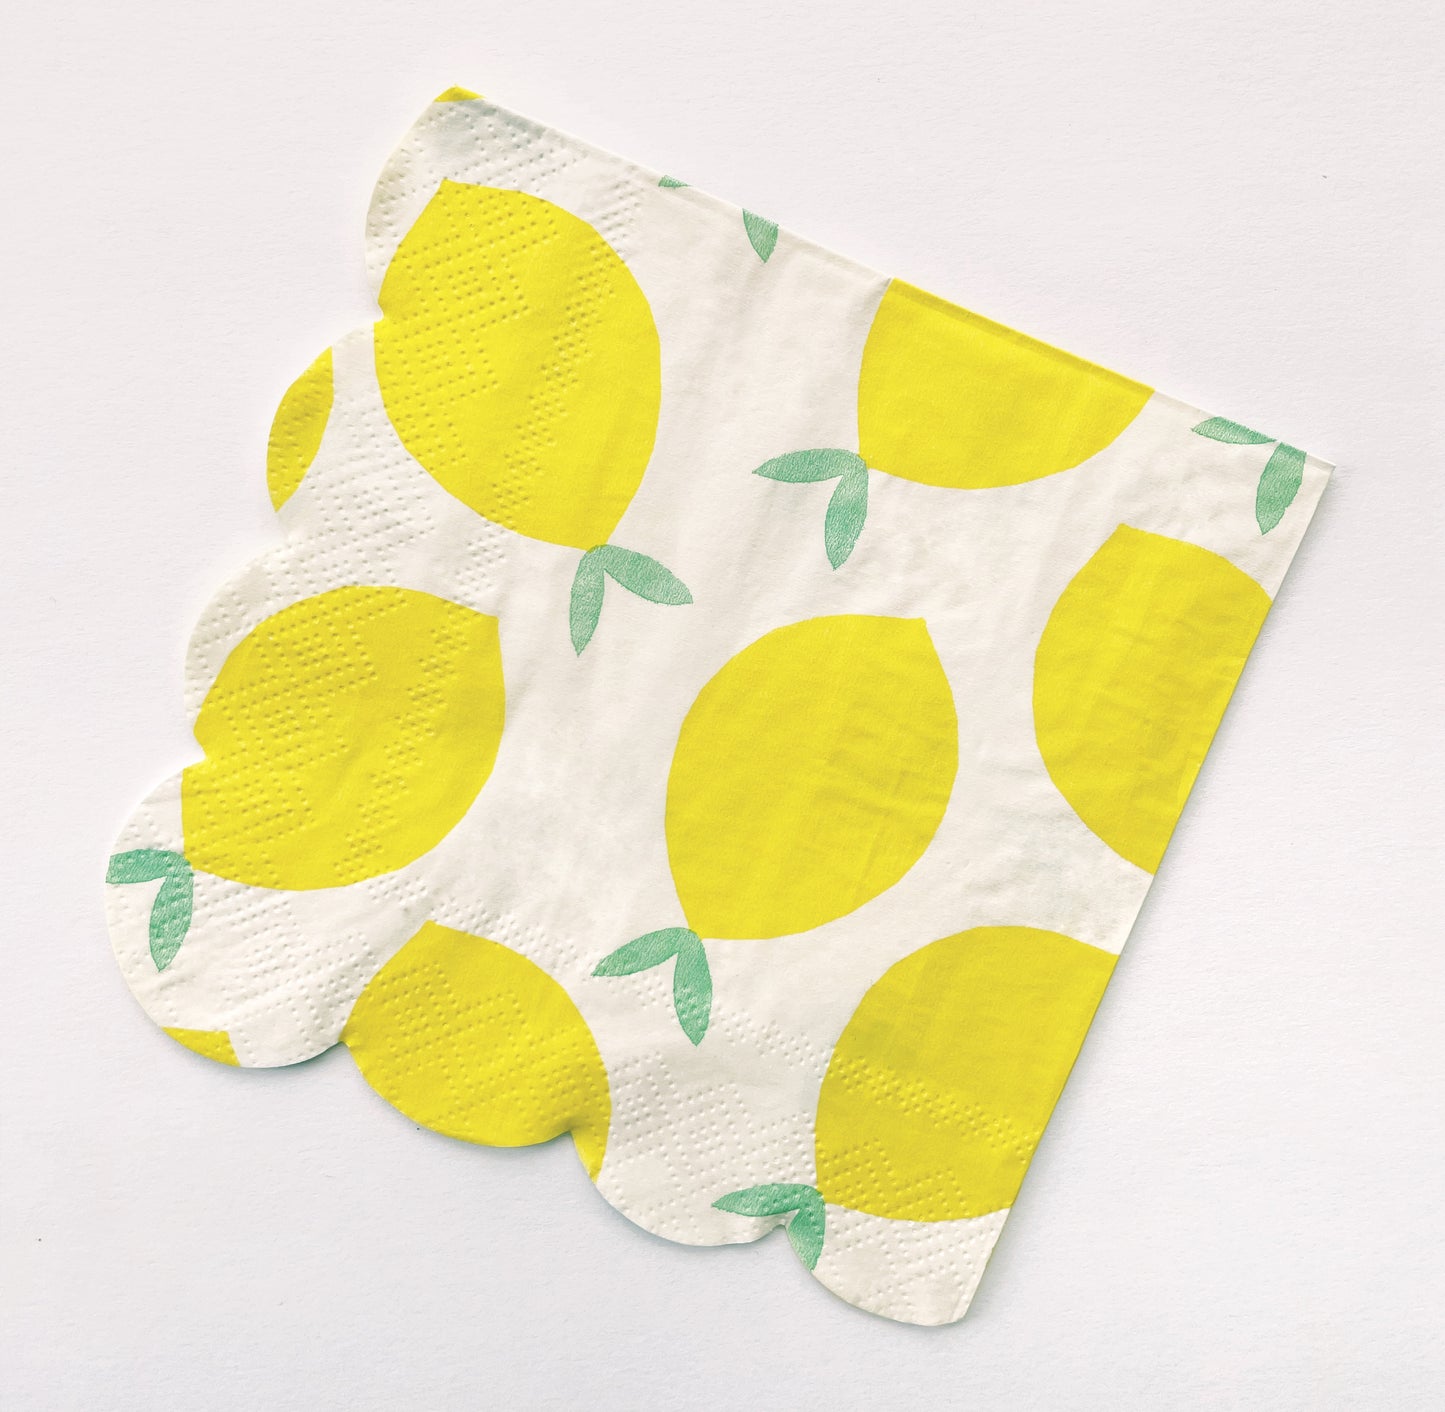 The Lemon Party Kit's paper party napkins. The lemon pattern includes yellow, green and white colours. The napkins have scalloped edges.